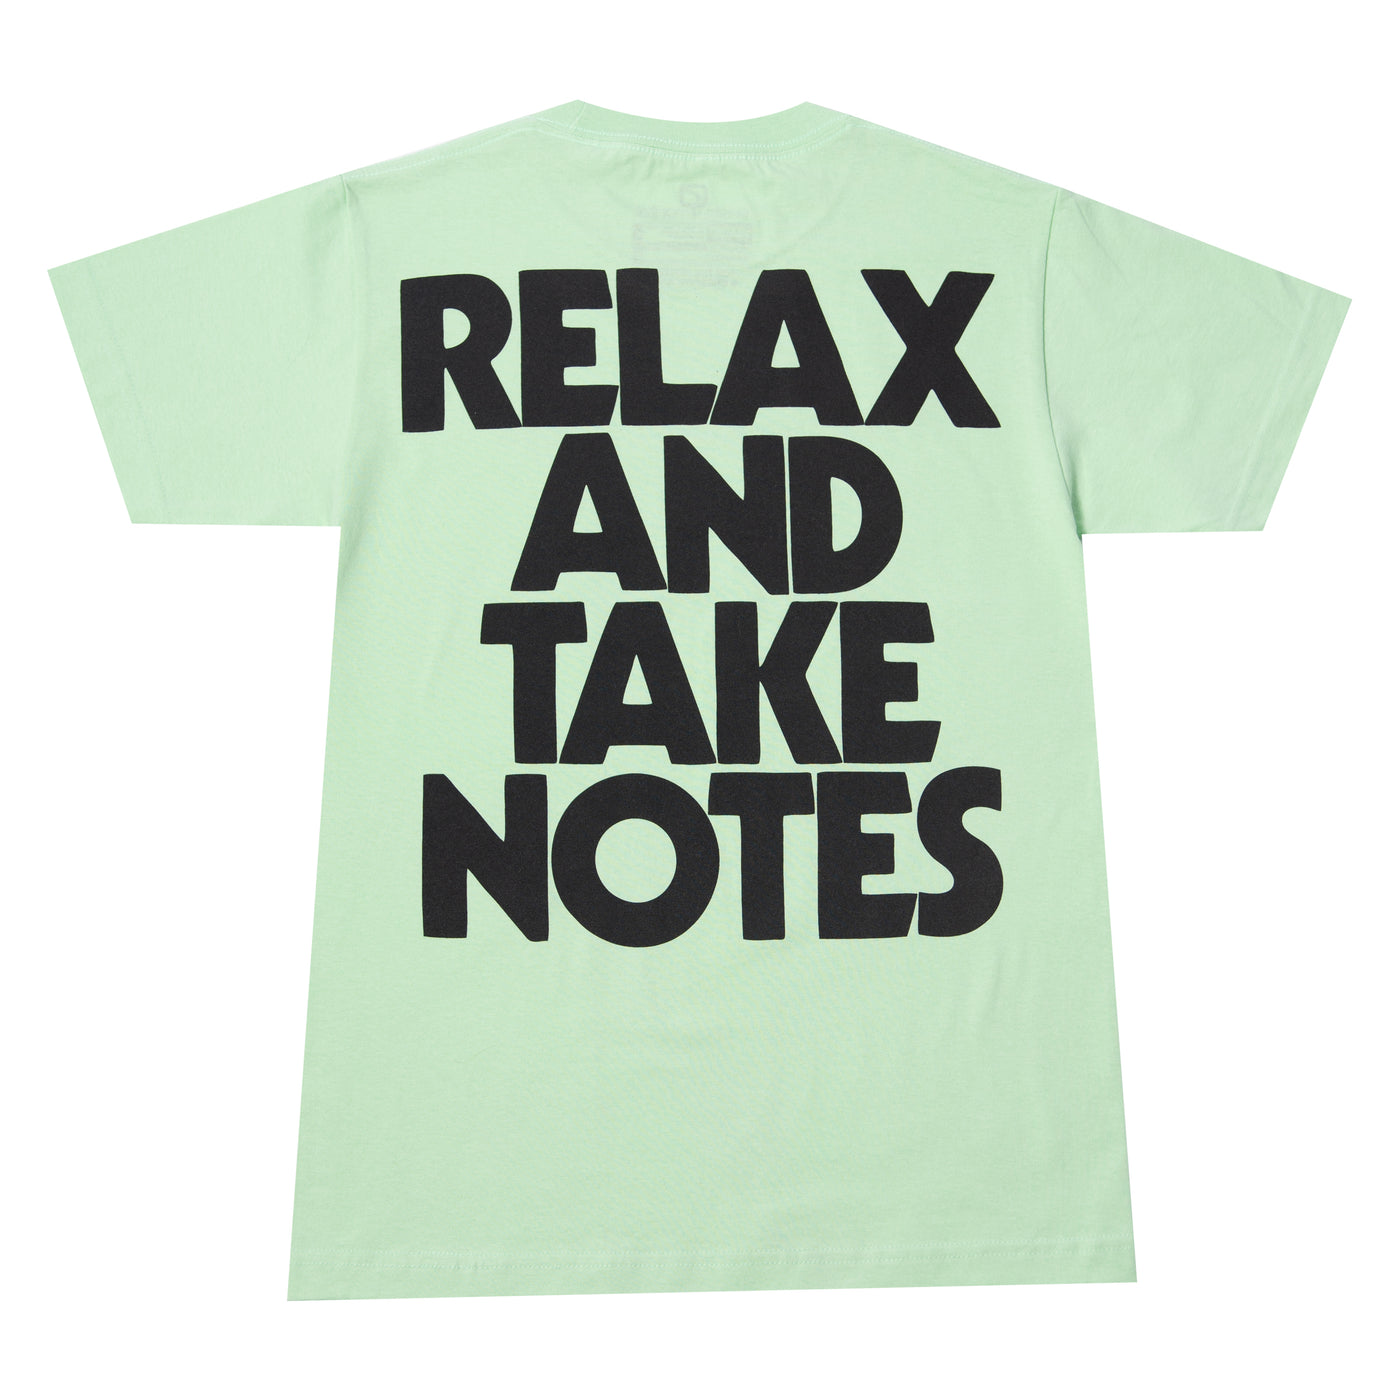 "RELAX AND TAKE NOTES"